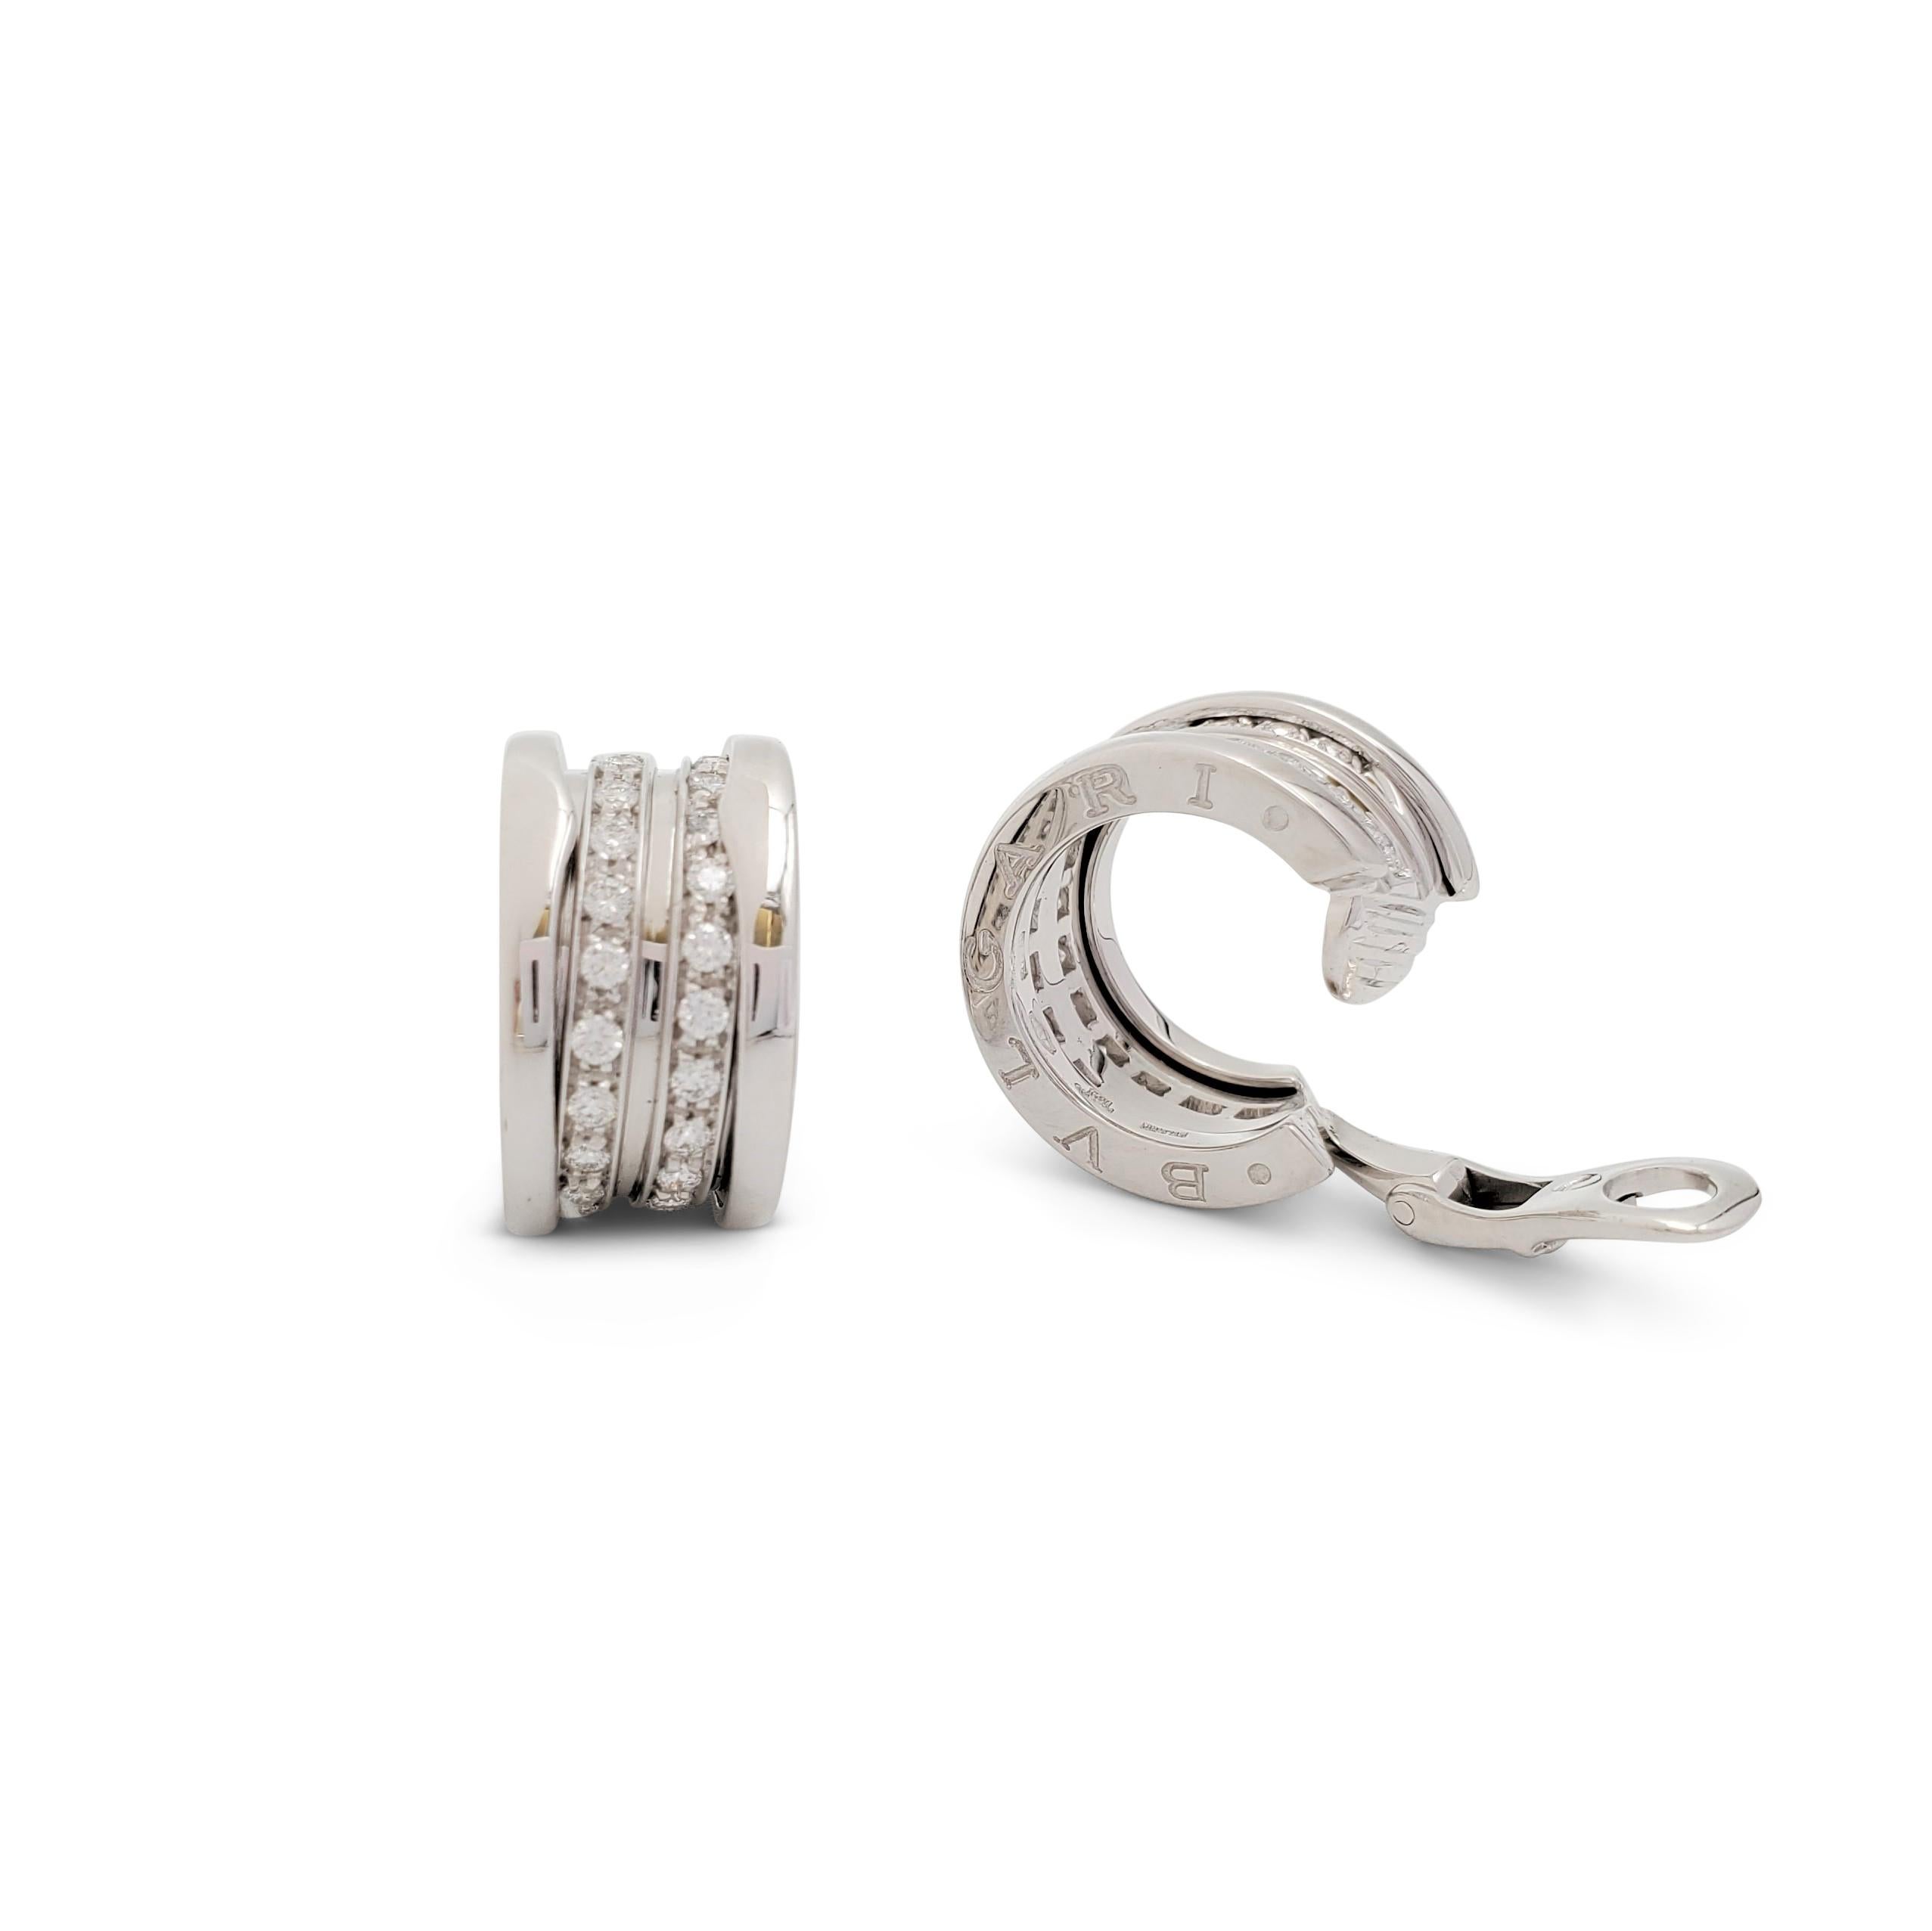 Authentic Bvlgari 'B.zero1' hoop earrings crafted in 18 karat white gold feature two rows of round brilliant cut diamonds (E-F, VS) weighing an estimated 1.08 carats total weight. Signed Bvlgari, Made in Italy, 750, with hallmark. The earrings are